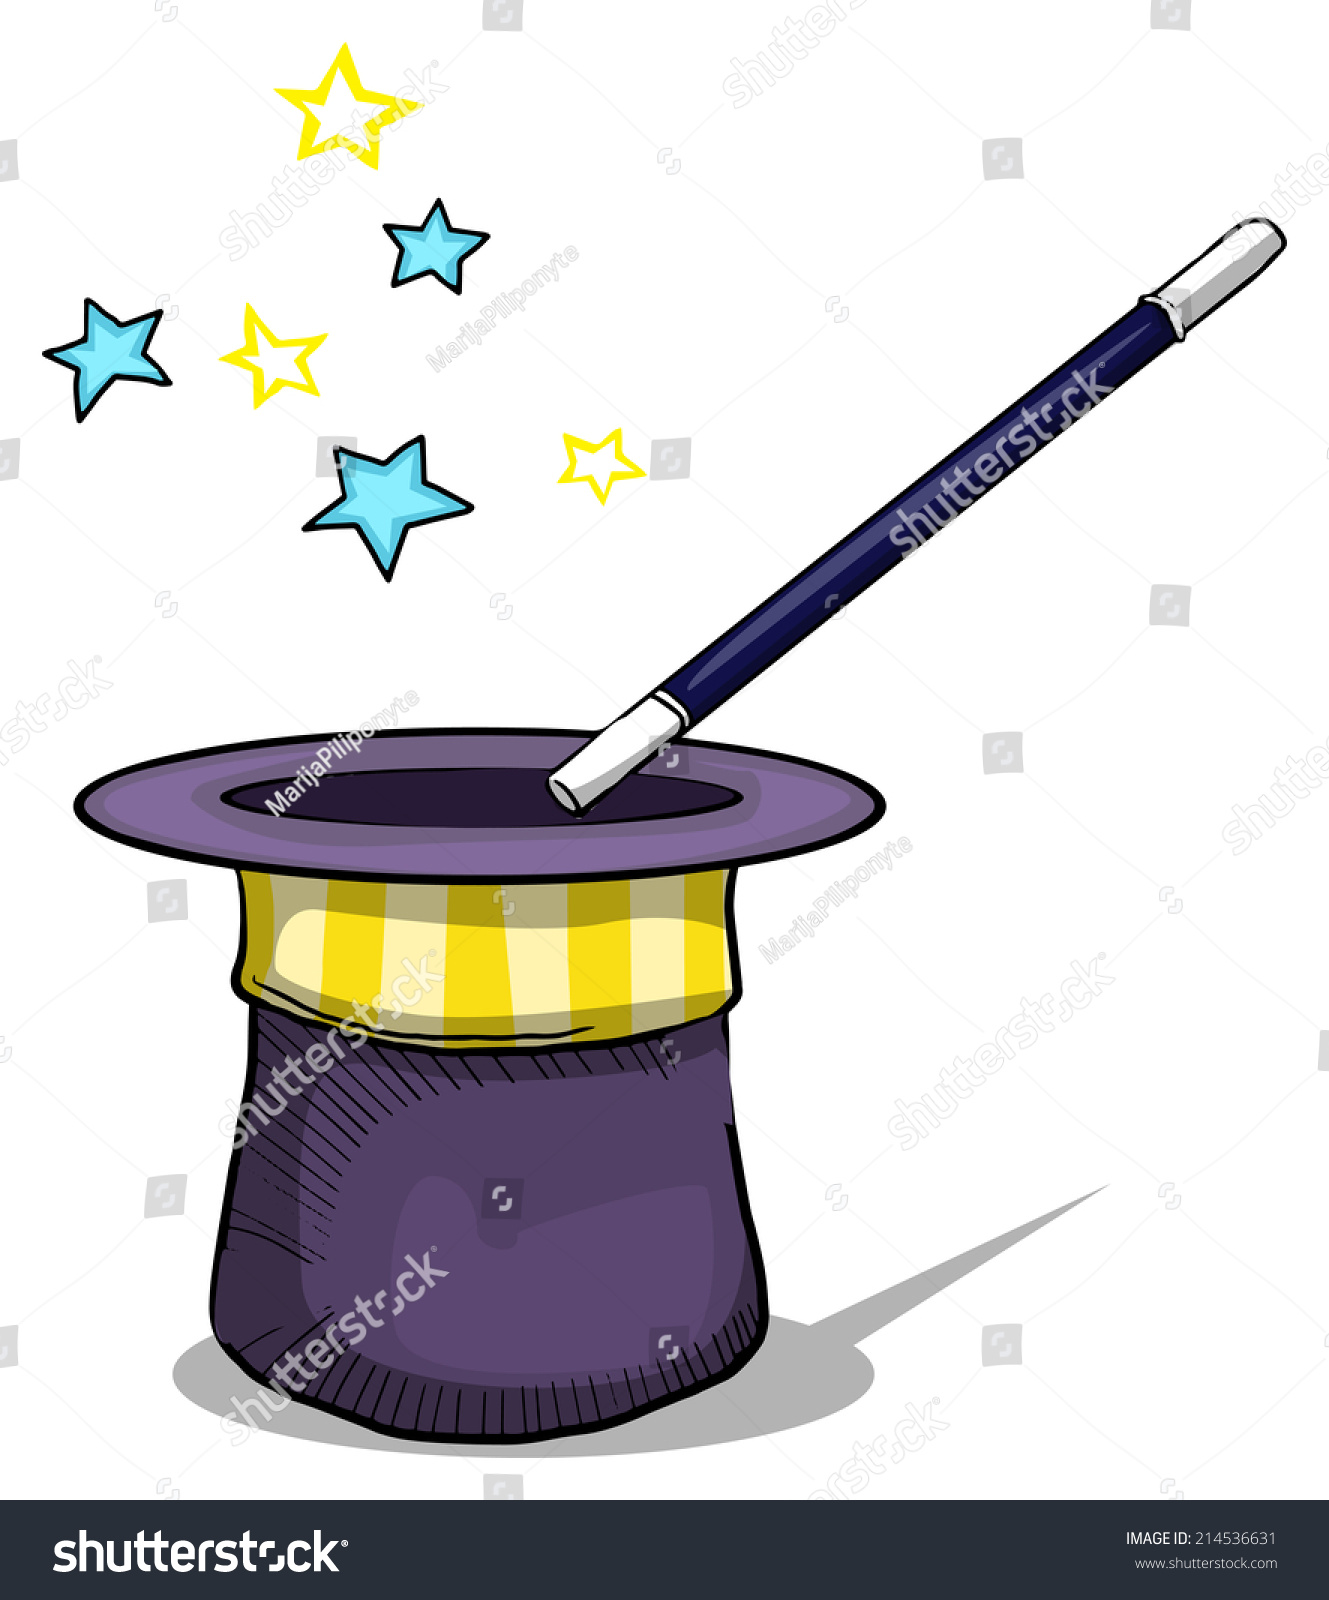 free clipart magic hat and wand - photo #46